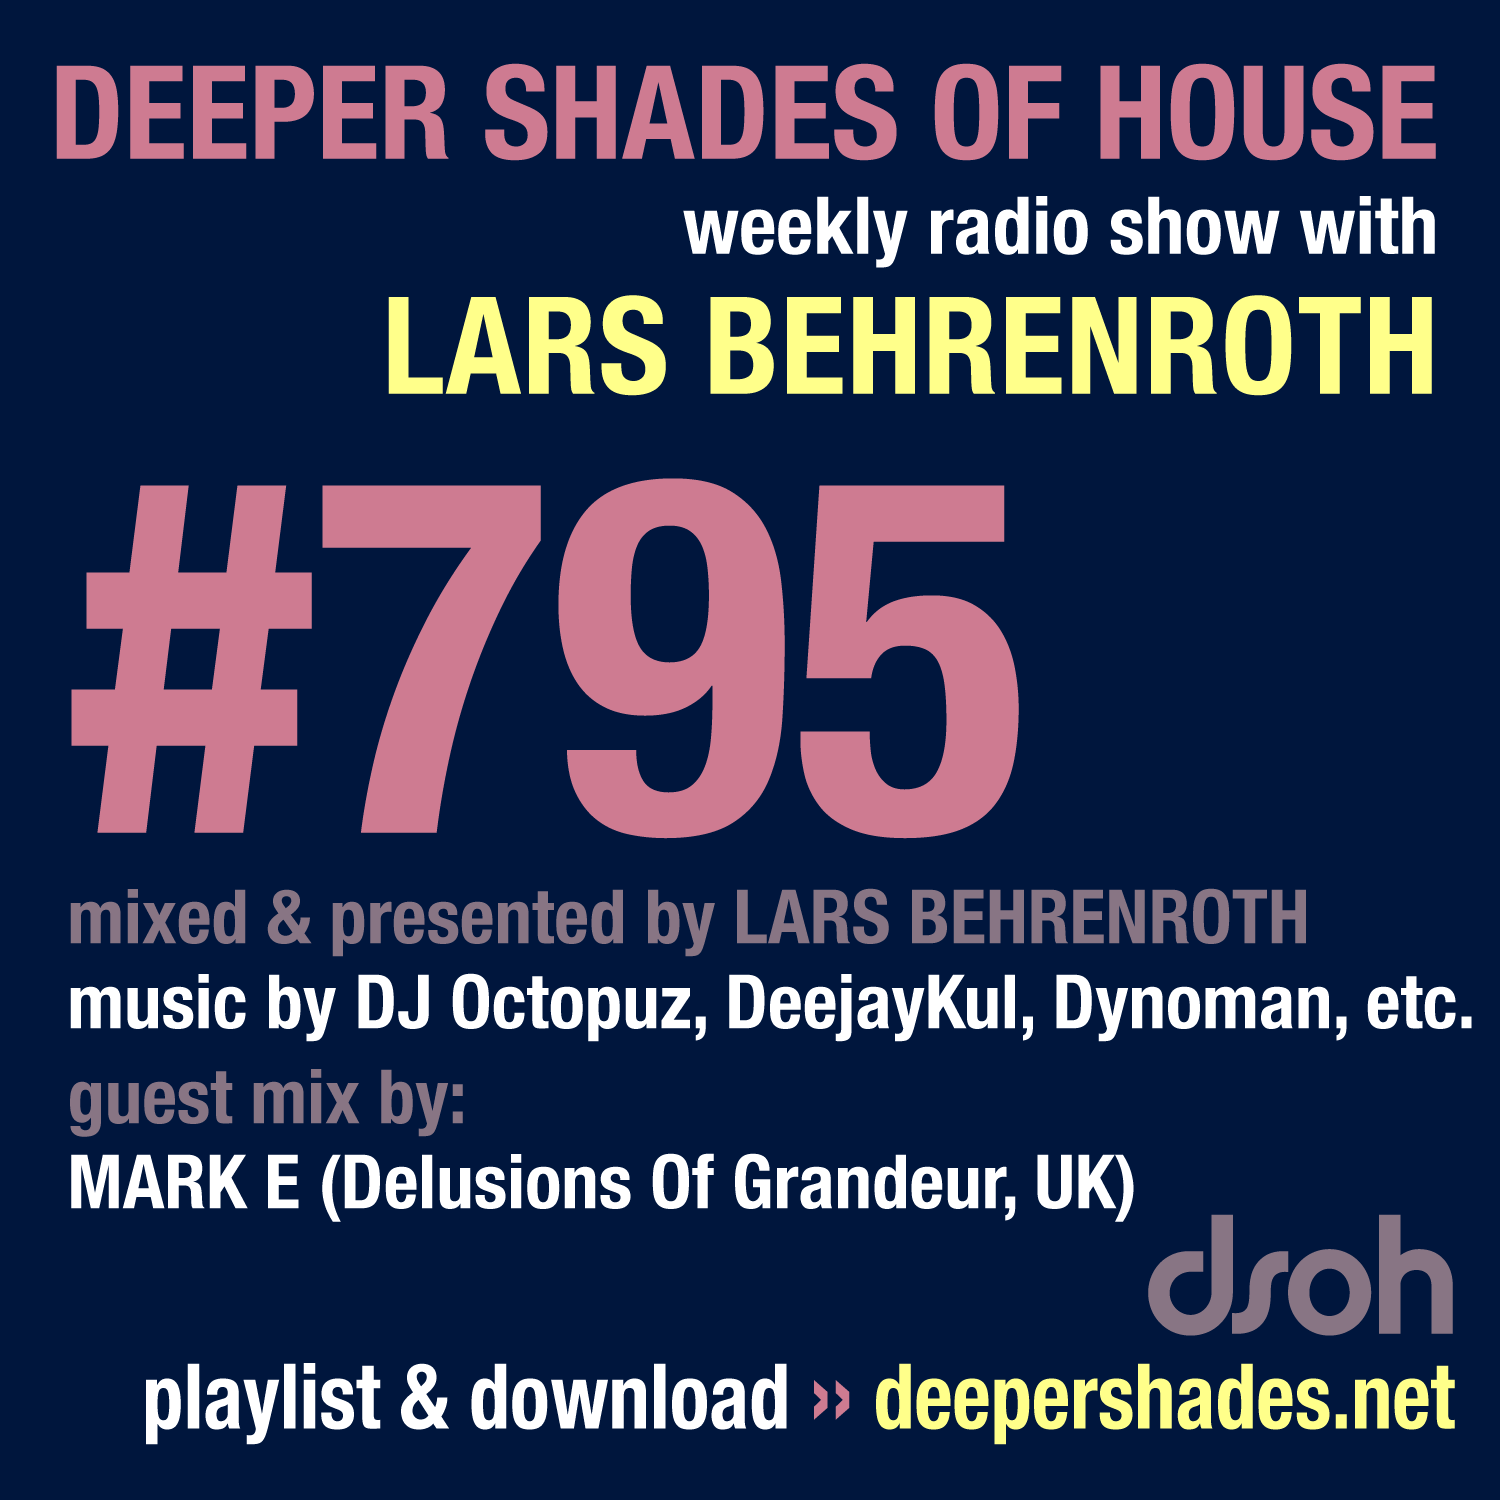 Deeper Shades Of House 795